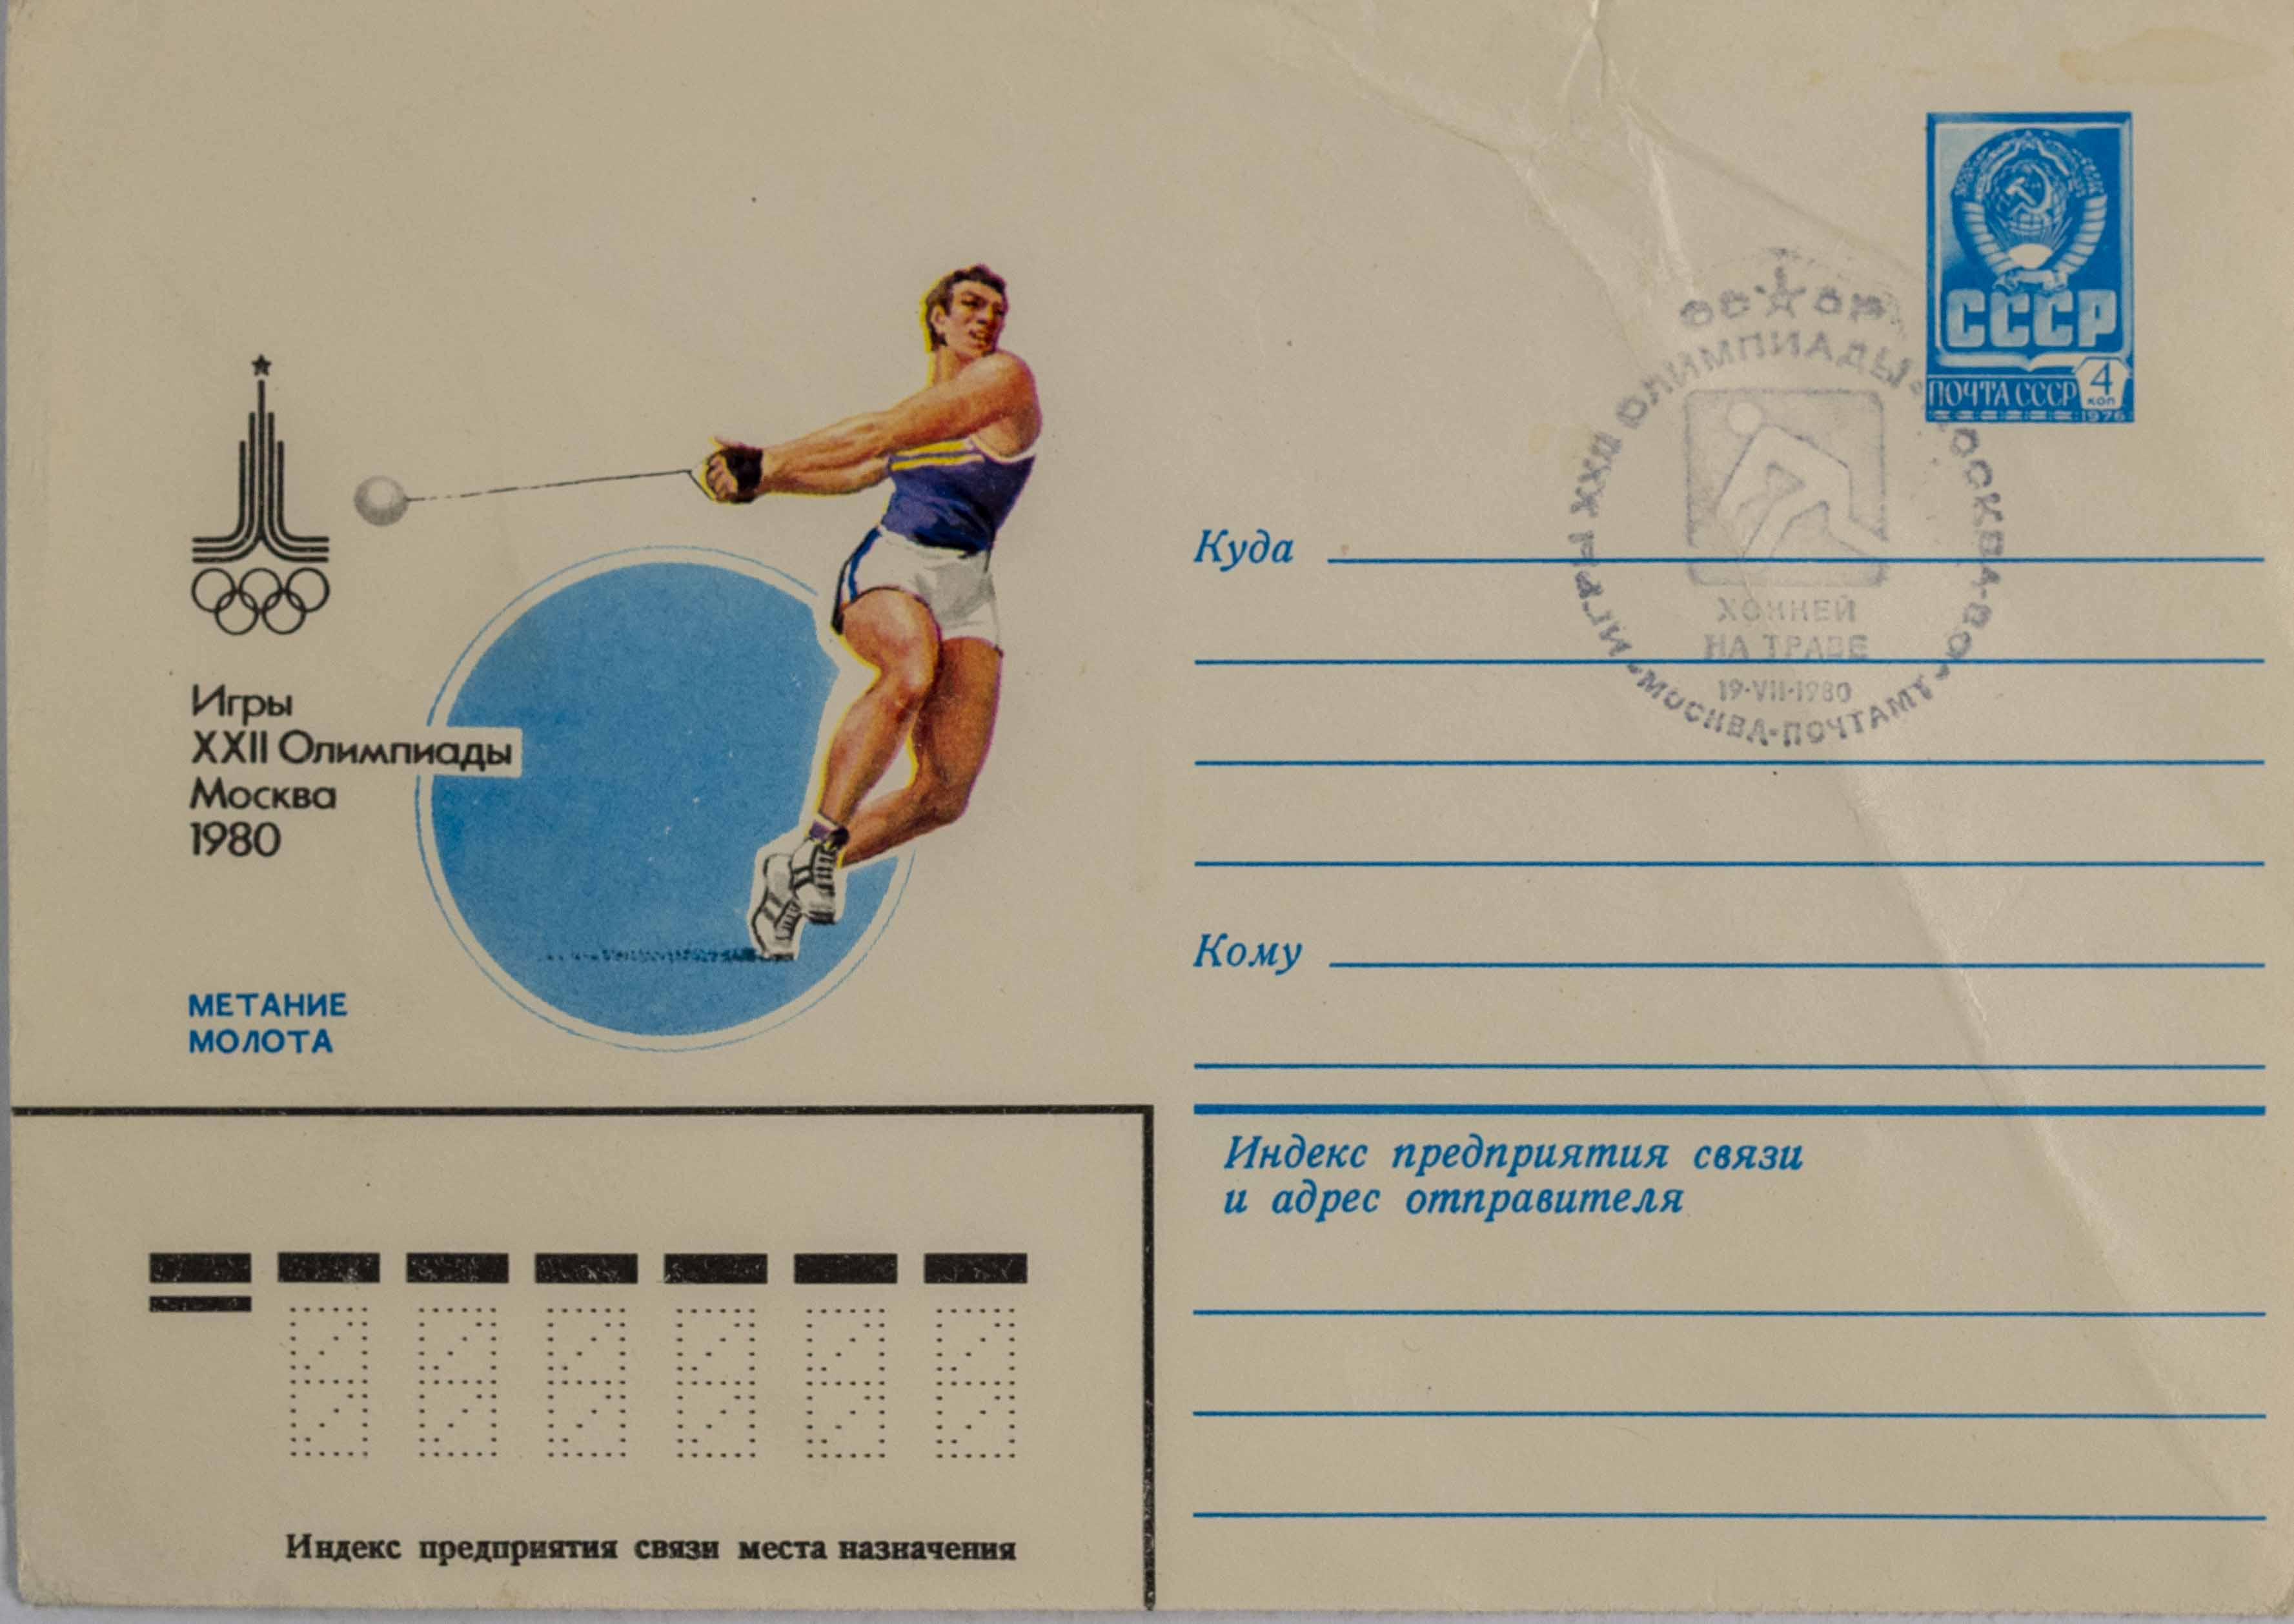 FDC, Olympic games Moscow, Kladivo, 1980